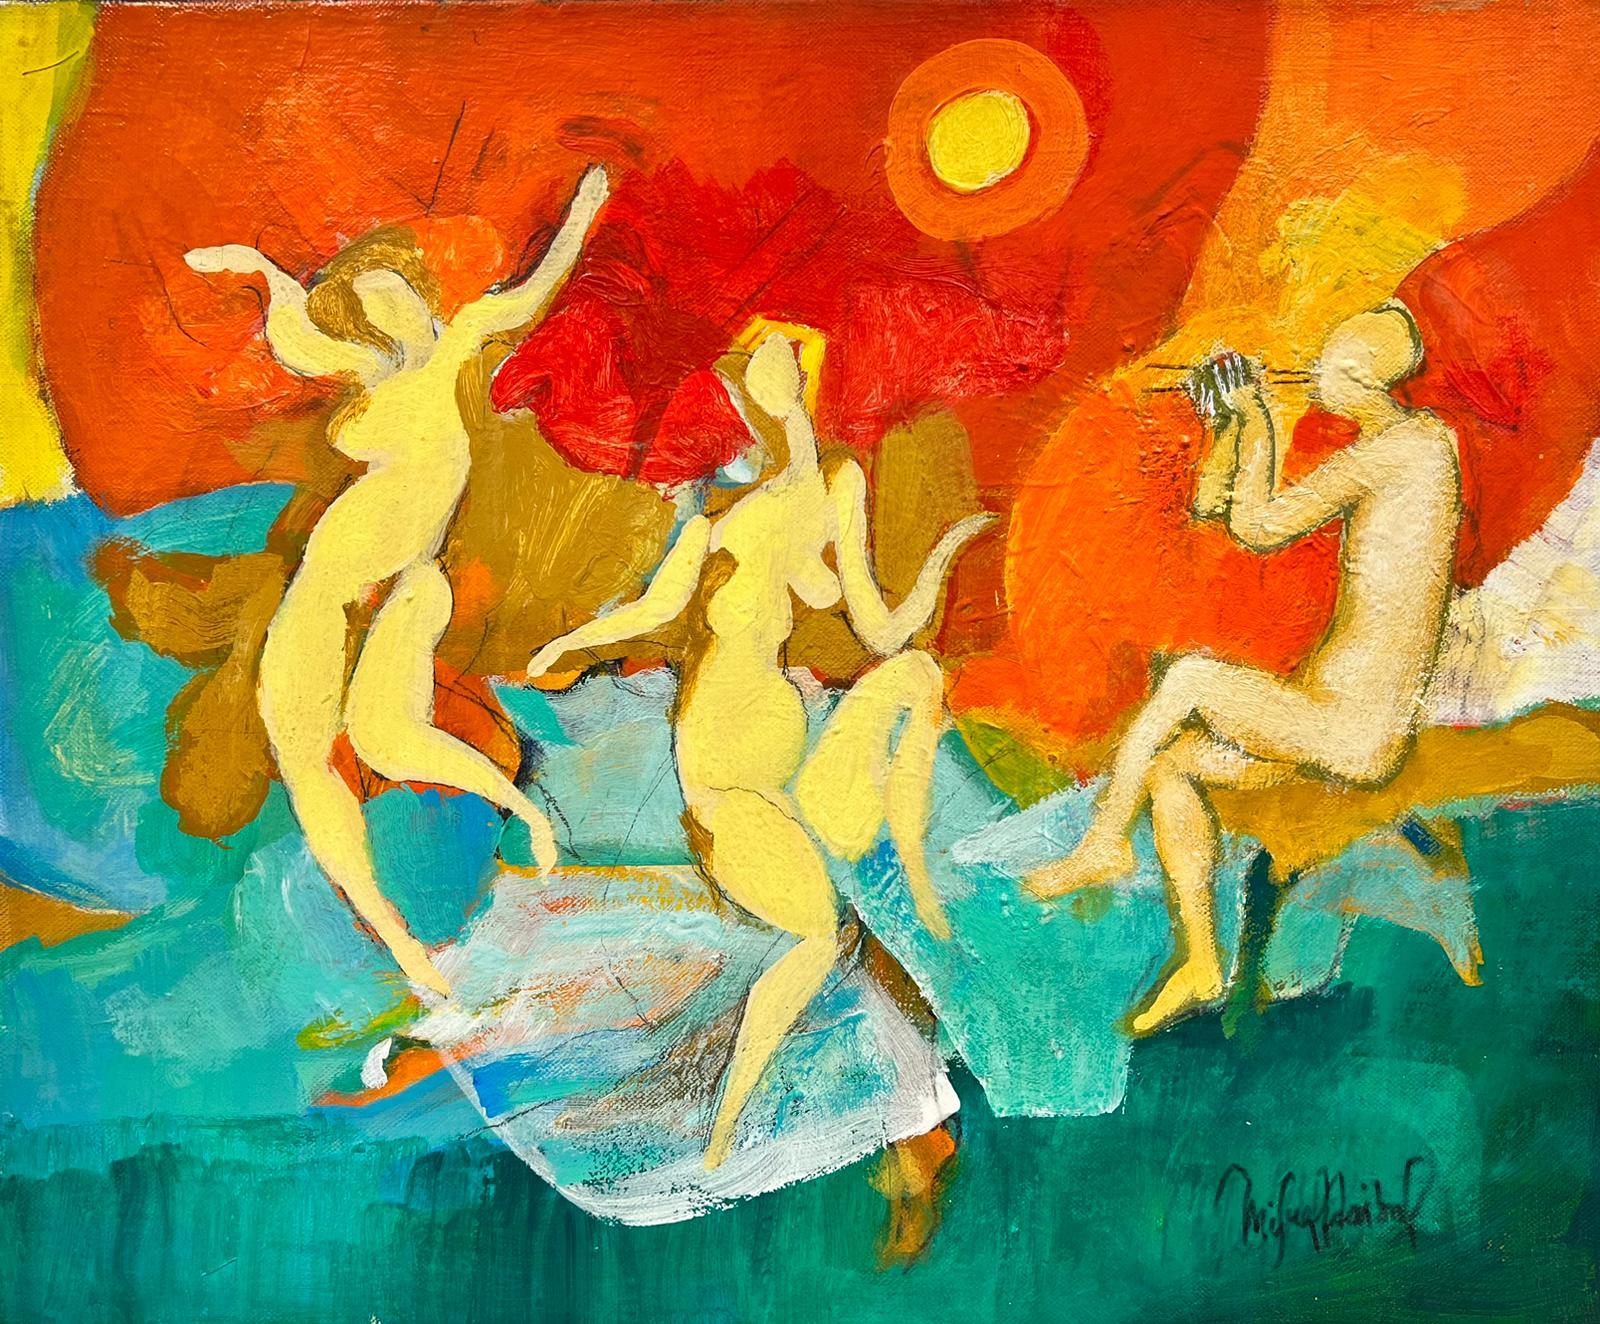 Miguel Anibal Nude Painting - Modernist Dancing Nudes at Orange Sunset by French/ Chilean Artist signed oil 